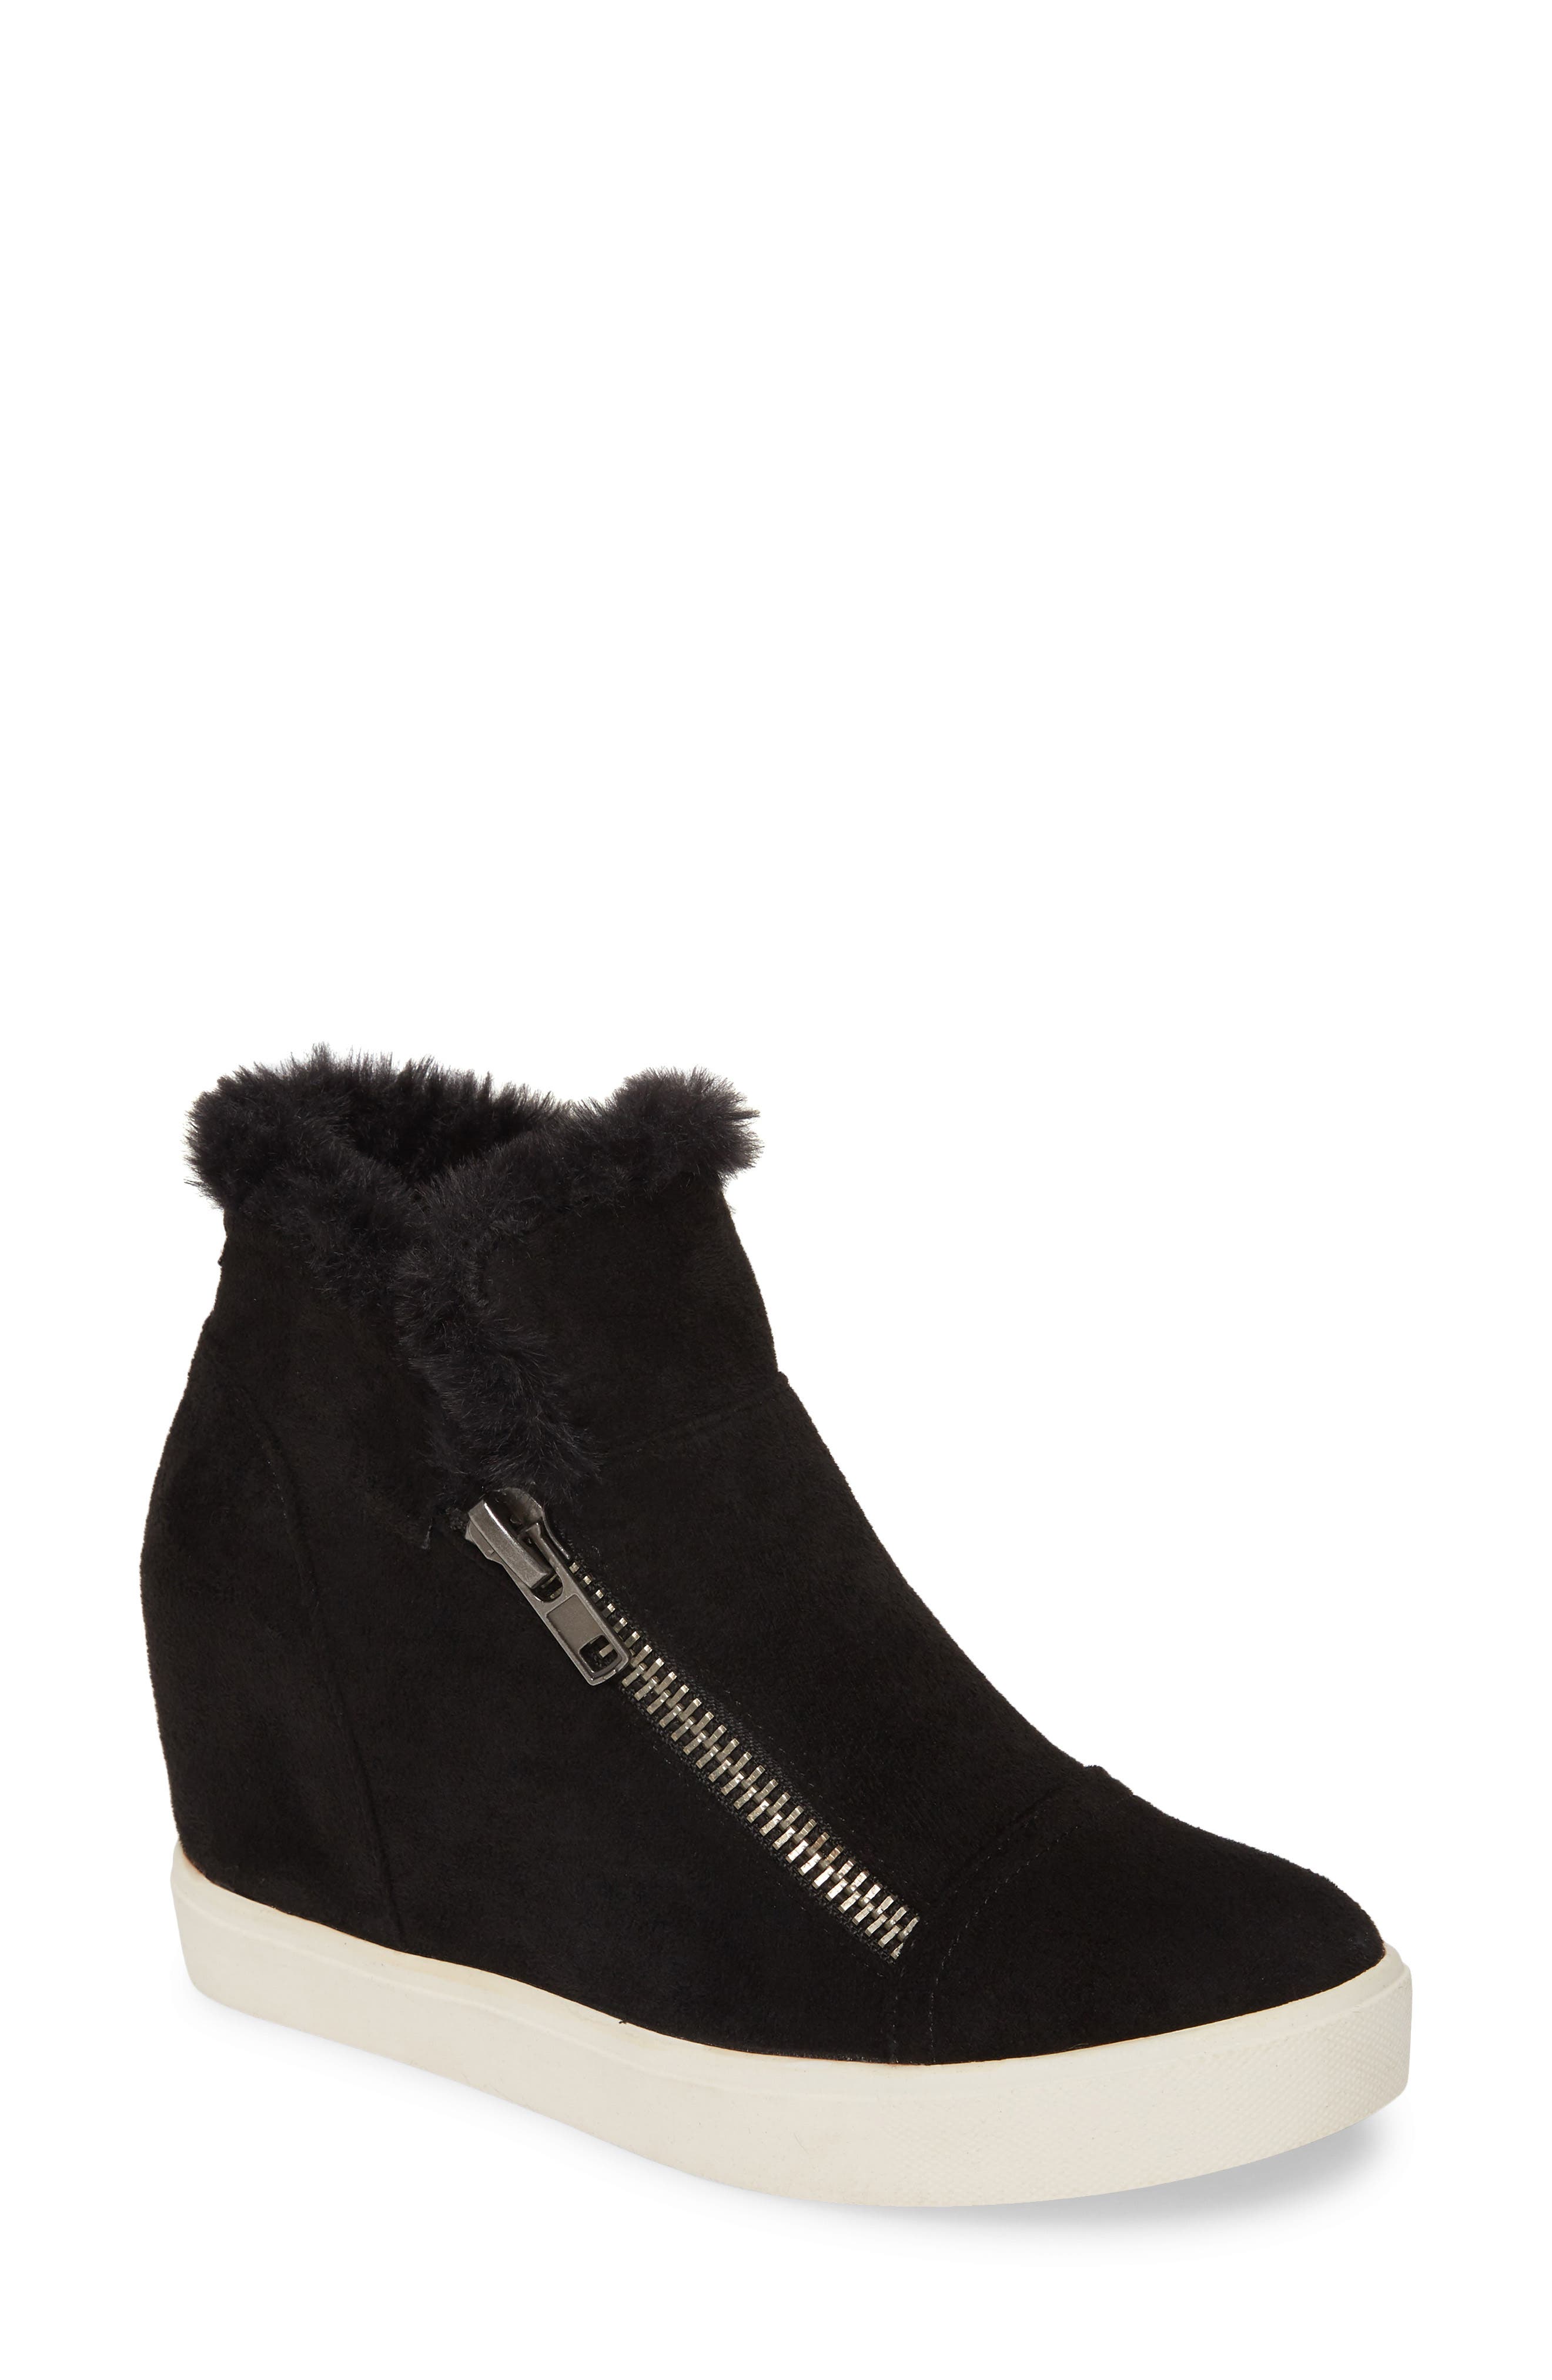 Later Days Faux Fur Trim Wedge Sneaker 